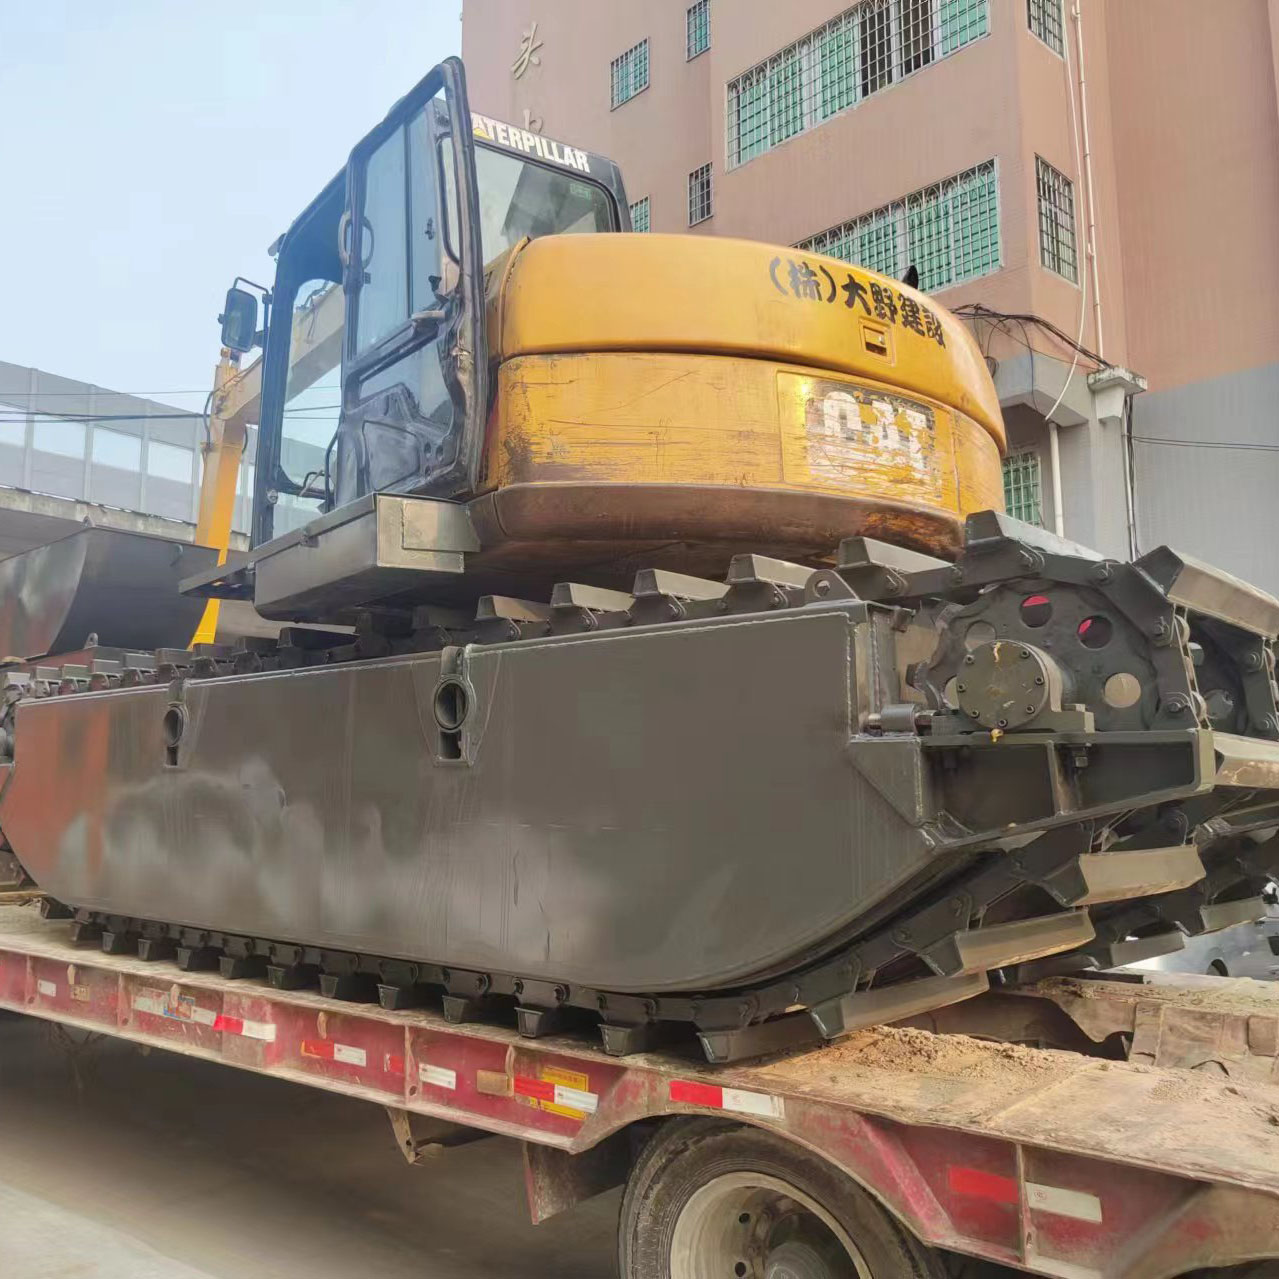 Caterpillar CAT307 amphibious excavator pontoon chassis comes with an auxiliary pontoon tank